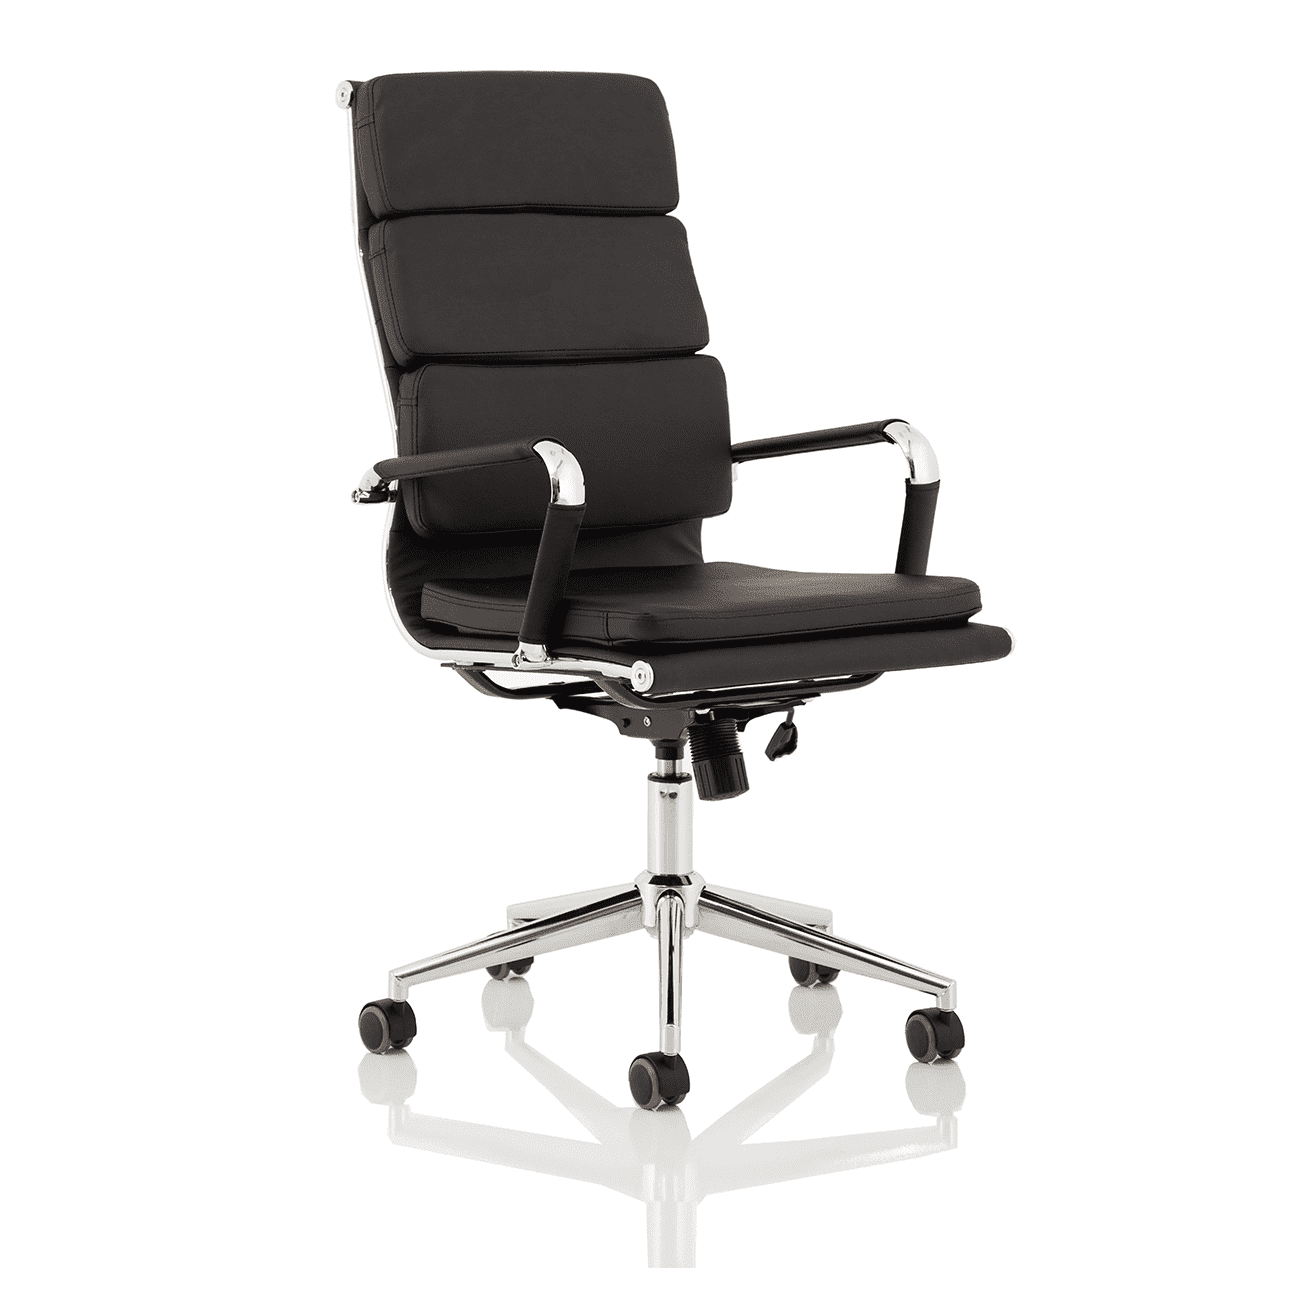 Hawkes High Back Executive Office Chair - Black Leather, Chrome Frame, Fixed Arms, 120kg Capacity, 8hr Usage, Gas Height & Tilt Adjustment